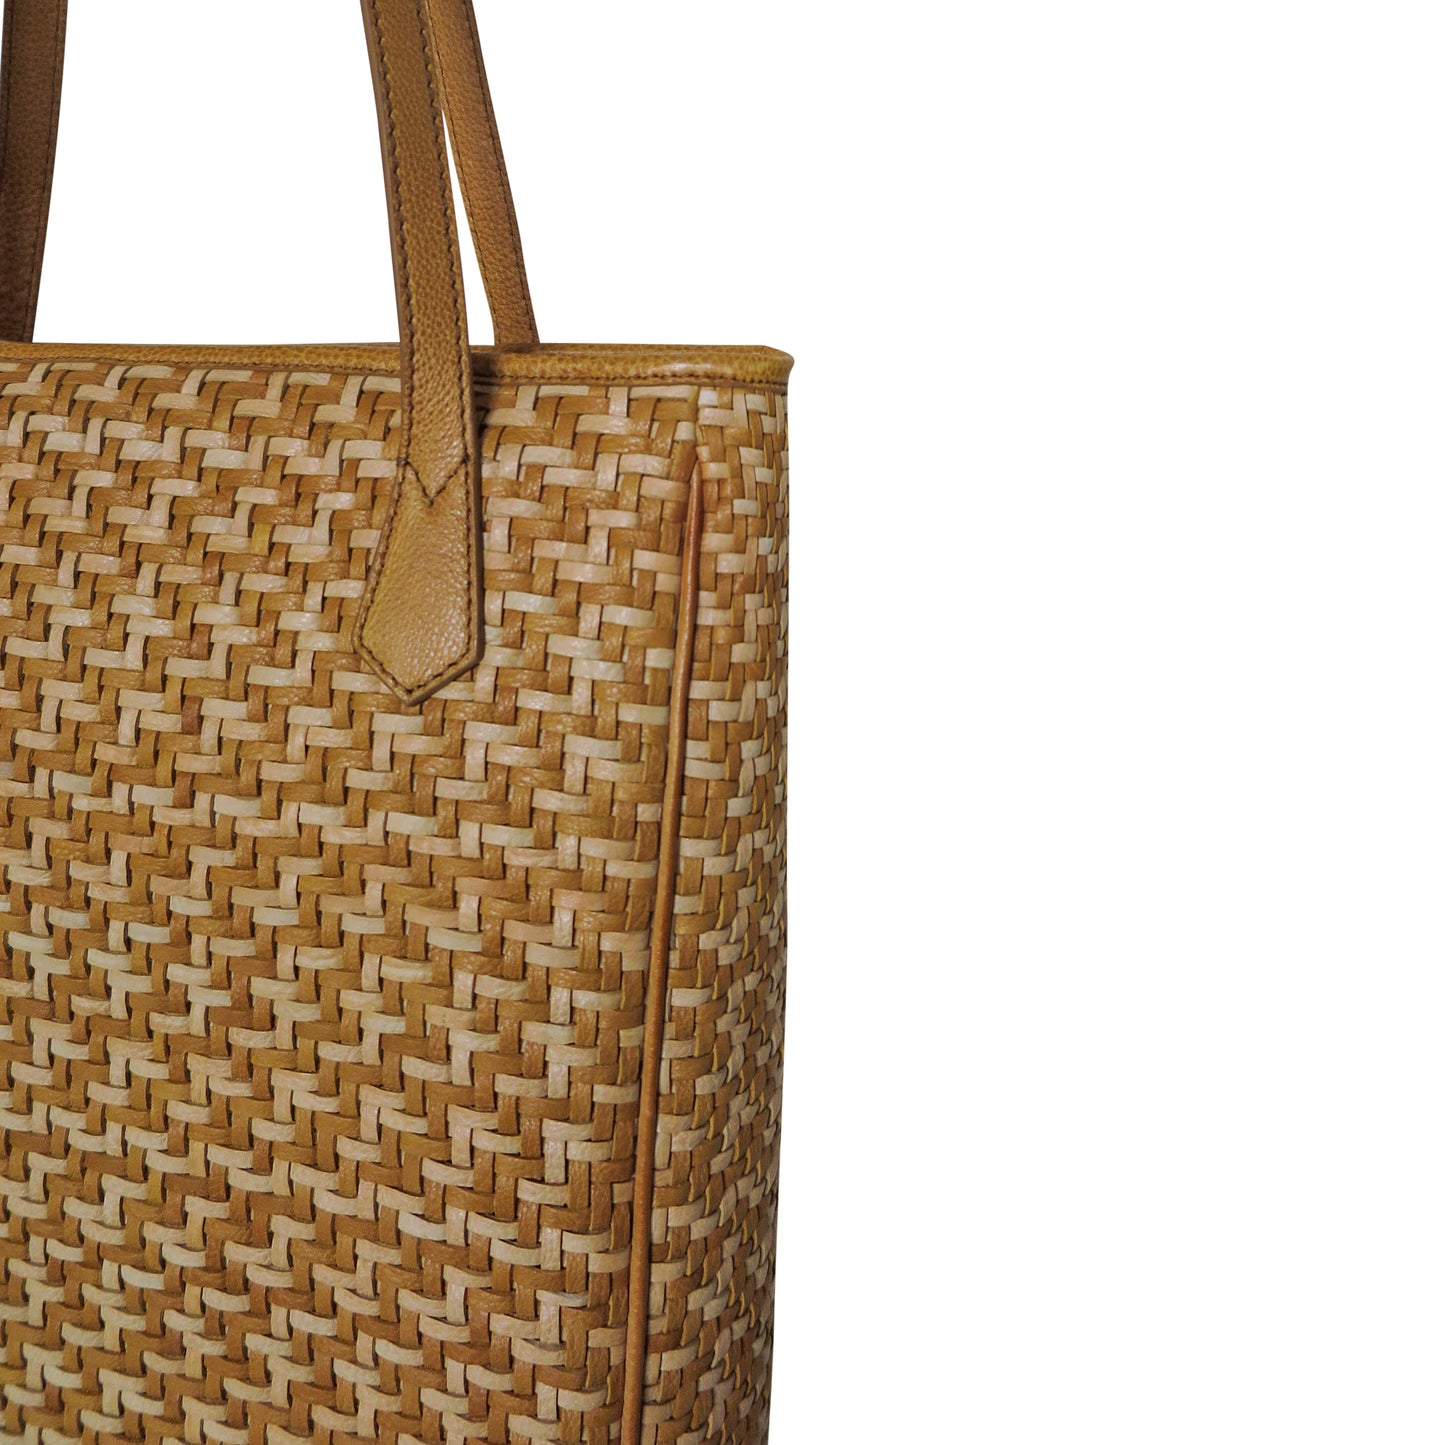 Lea Woven Leather Tote in Yellow/Beige